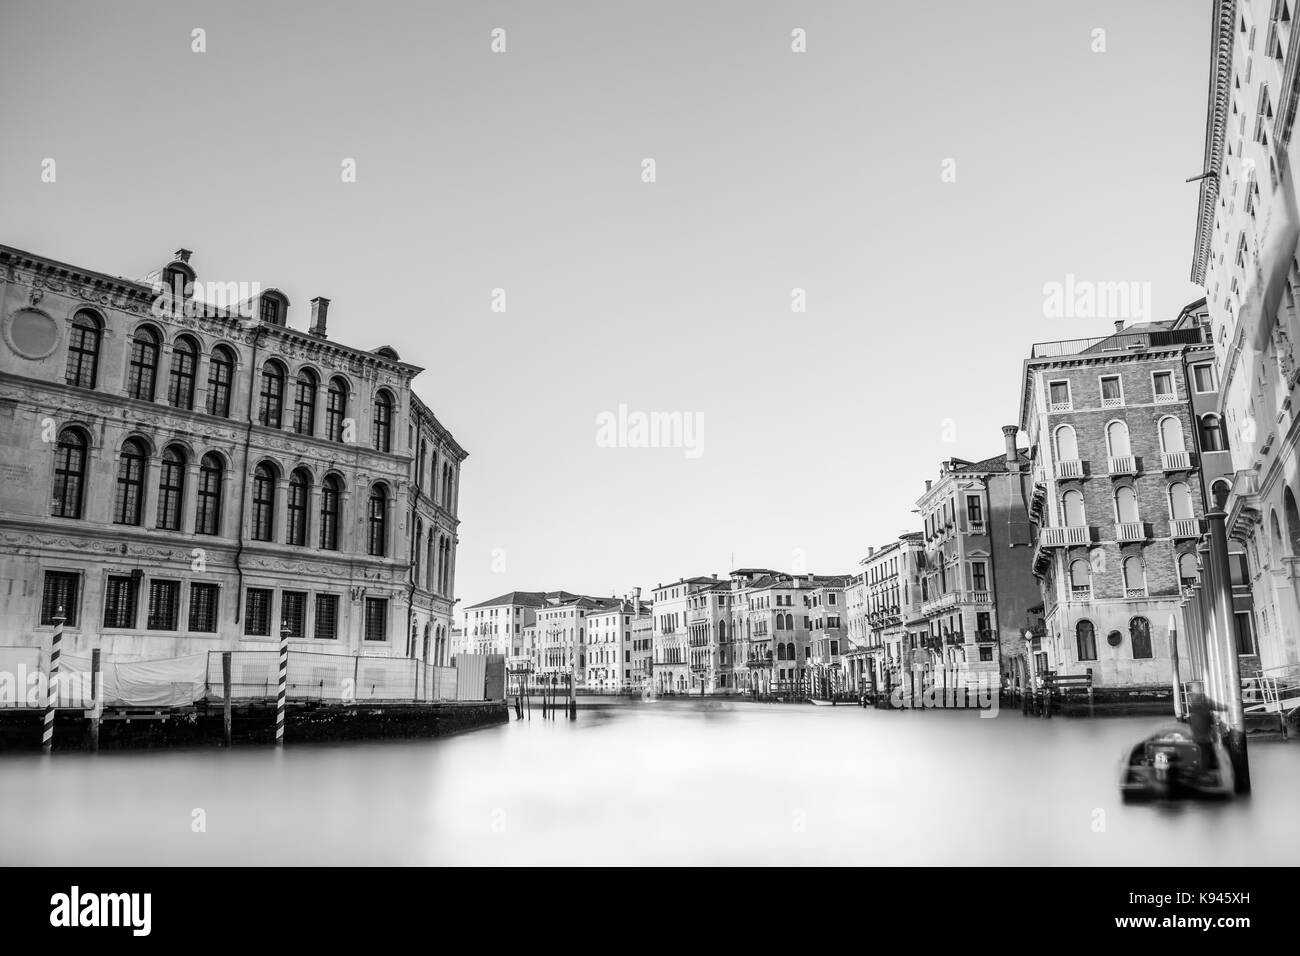 View of canal lined with historic houses, Venice, Italy. Stock Photo